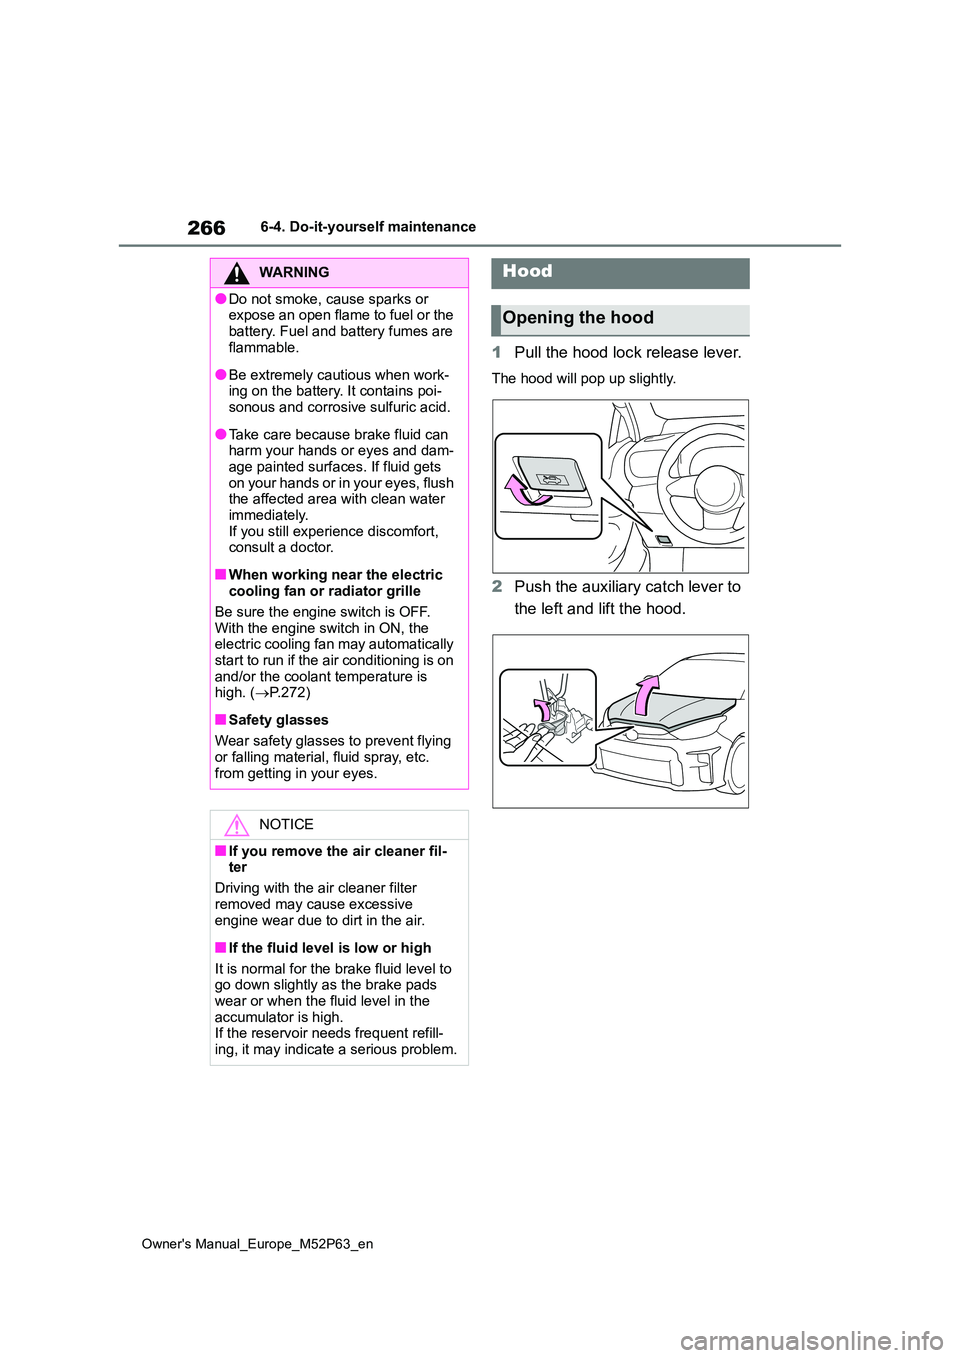 TOYOTA GR YARIS 2023  Owners Manual 266
Owner's Manual_Europe_M52P63_en
6-4. Do-it-yourself maintenance
1Pull the hood lock release lever.
The hood will pop up slightly.
2Push the auxiliary catch lever to  
the left and lift the hoo